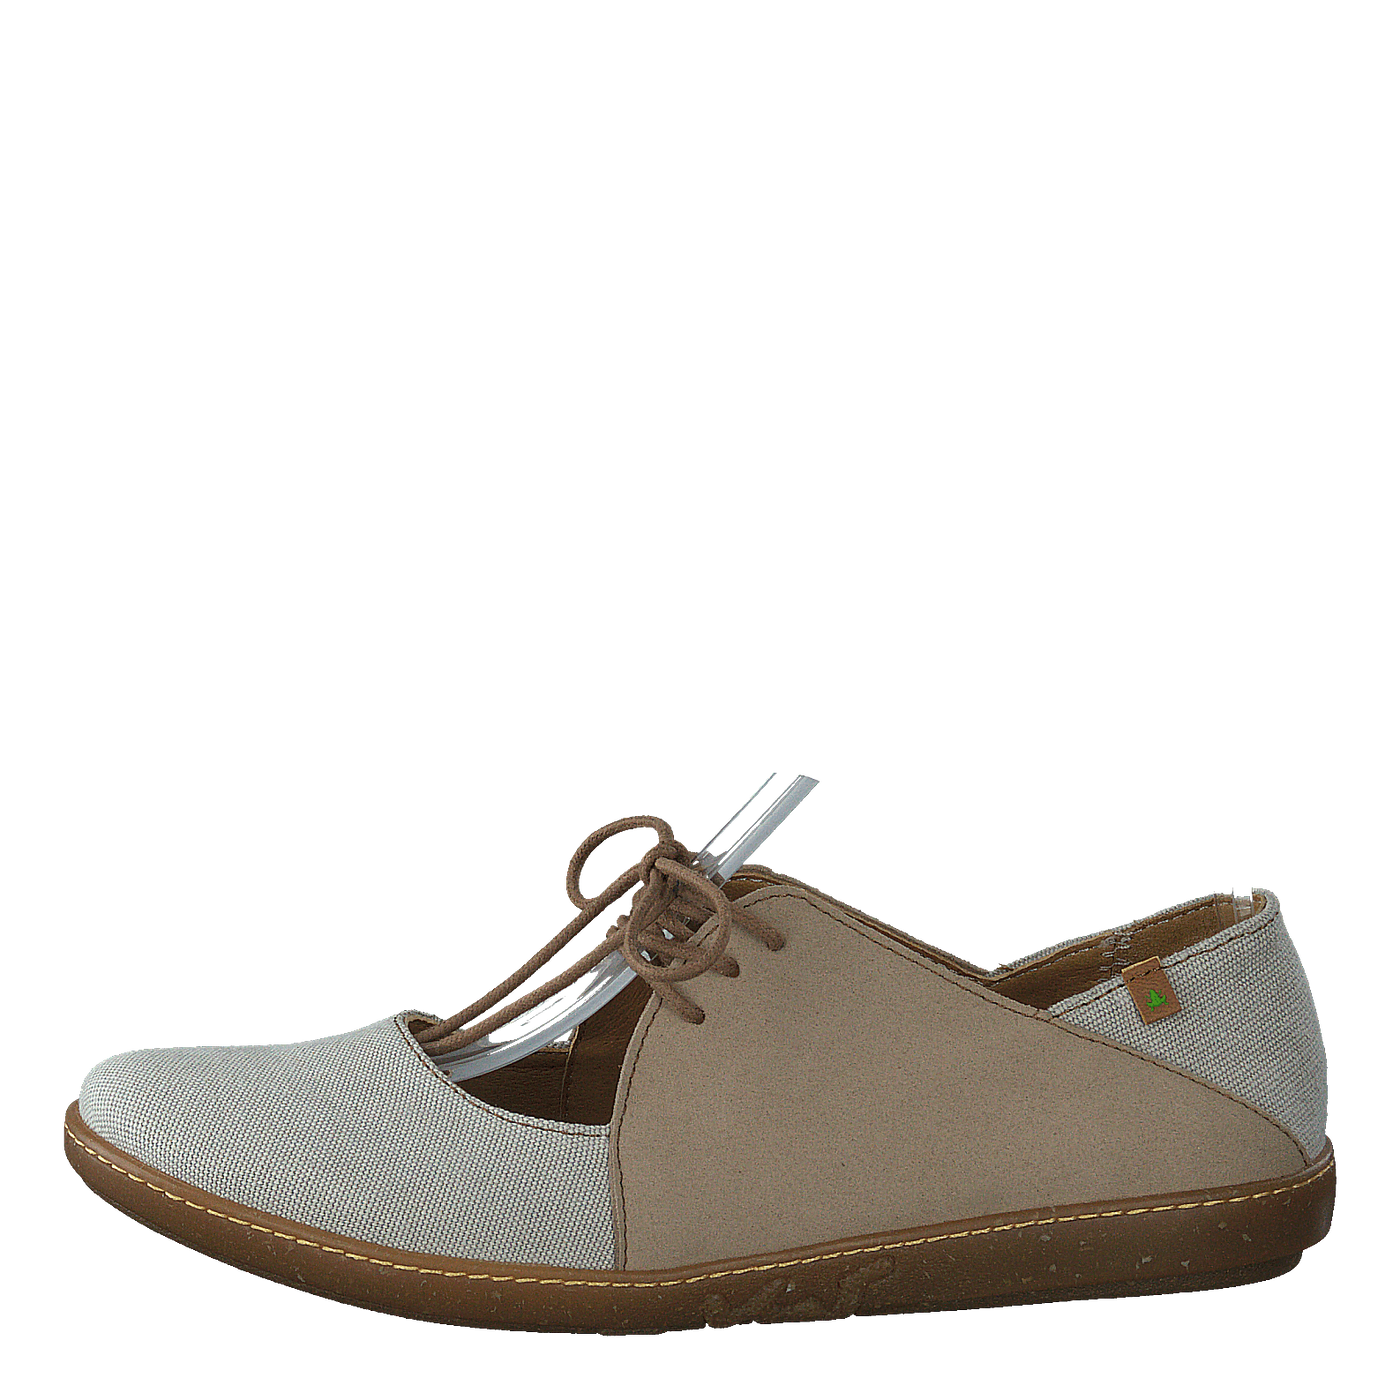 N5228t Organic Co-m. Suede Sto Stone